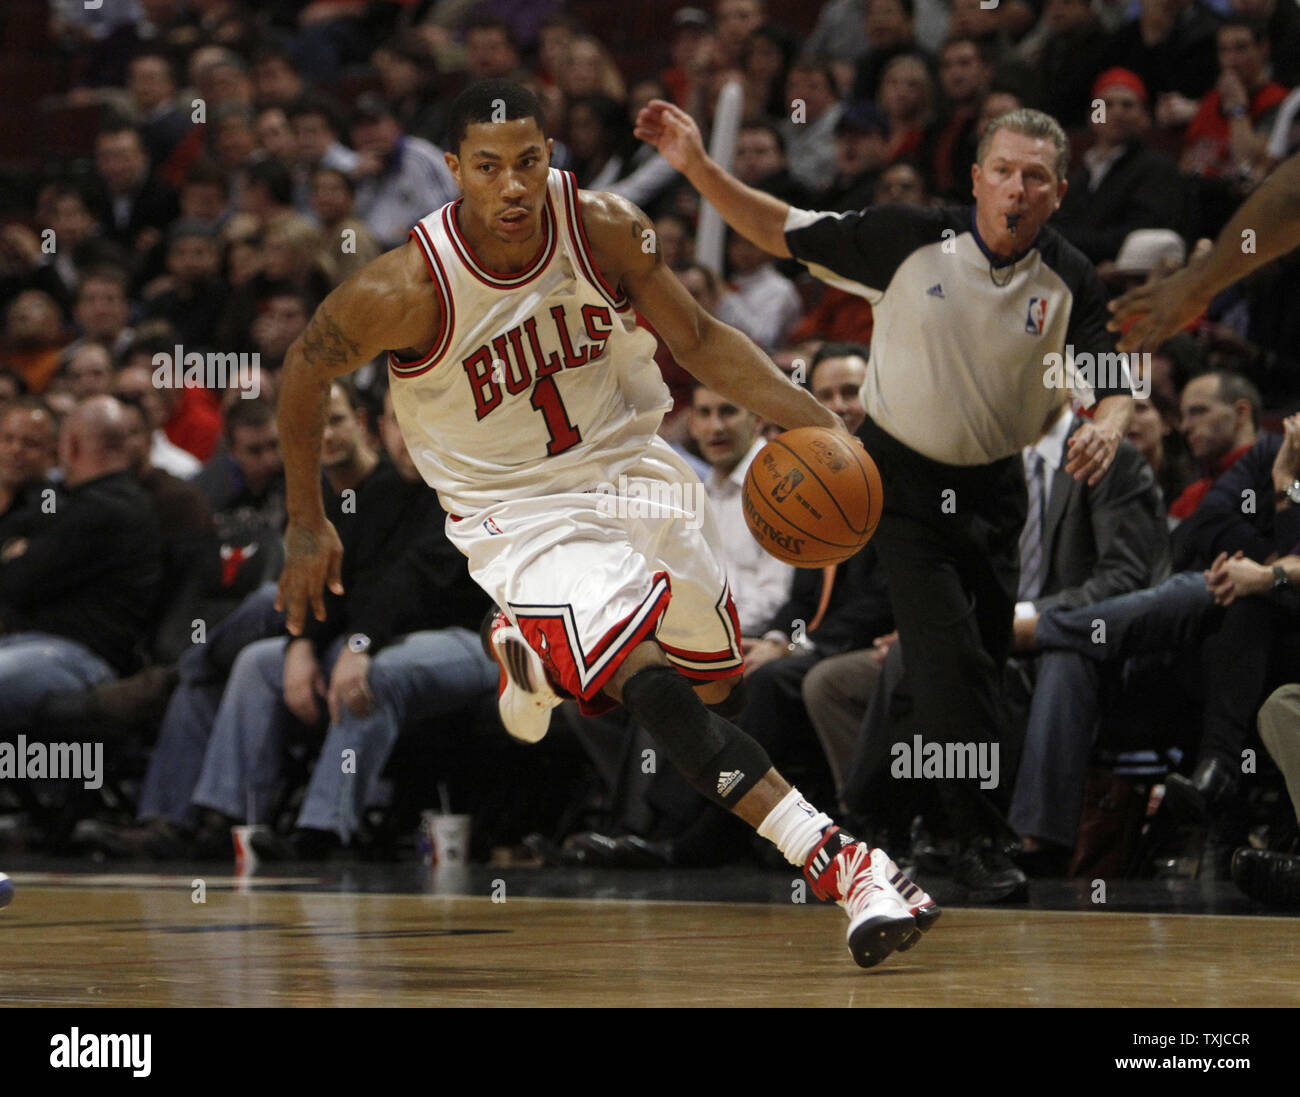 Chicago Bulls guard Derrick Rose brings the ball up the floor against the  Cleveland Cavaliers during the fourth quarter of game 3 of the first round  of the NBA Playoffs at the